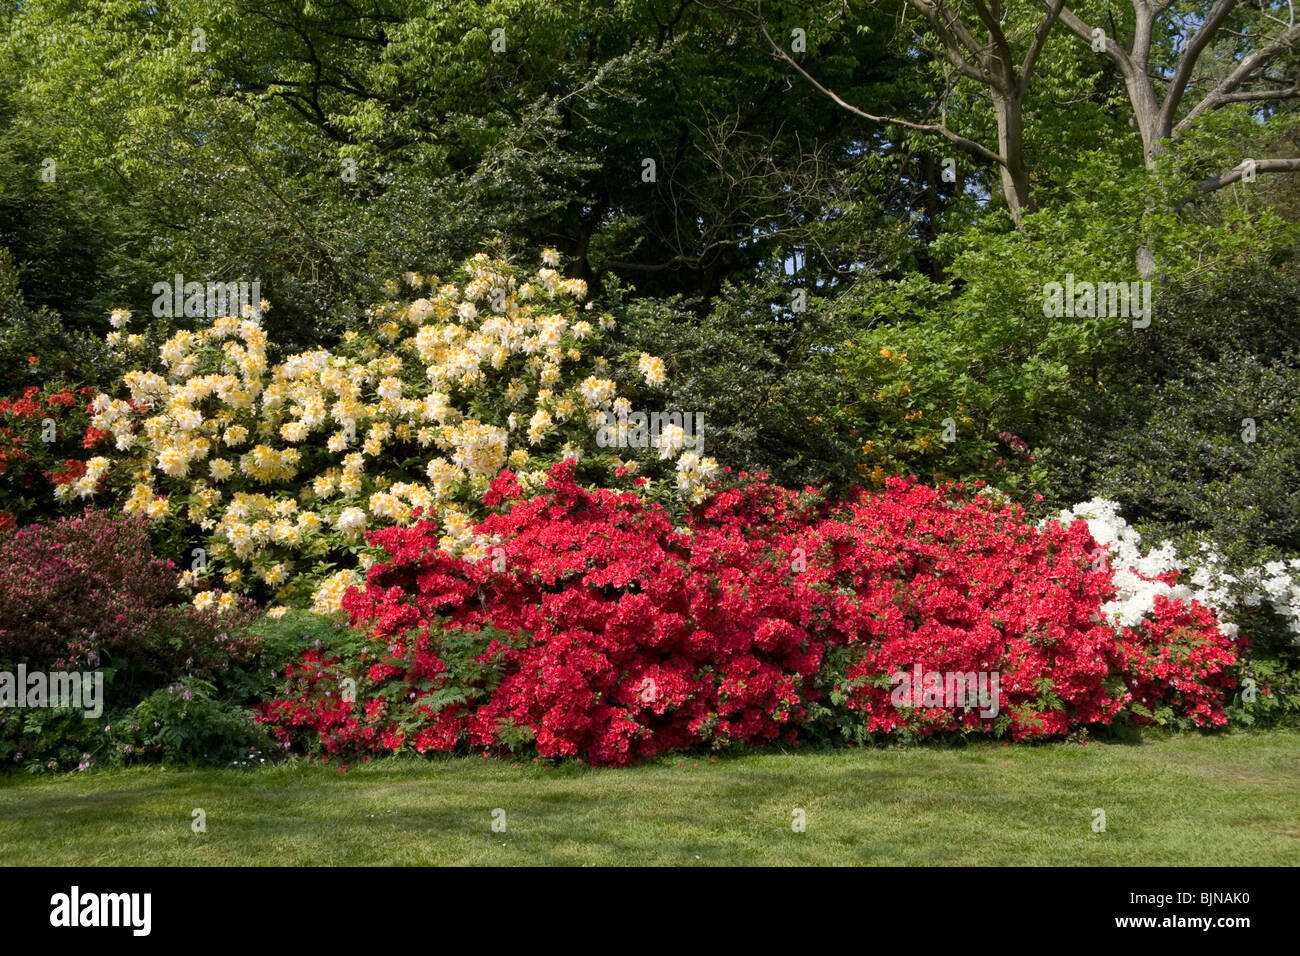 Azalea and Rhododendron bushes flowering May 2008 Stock Photo